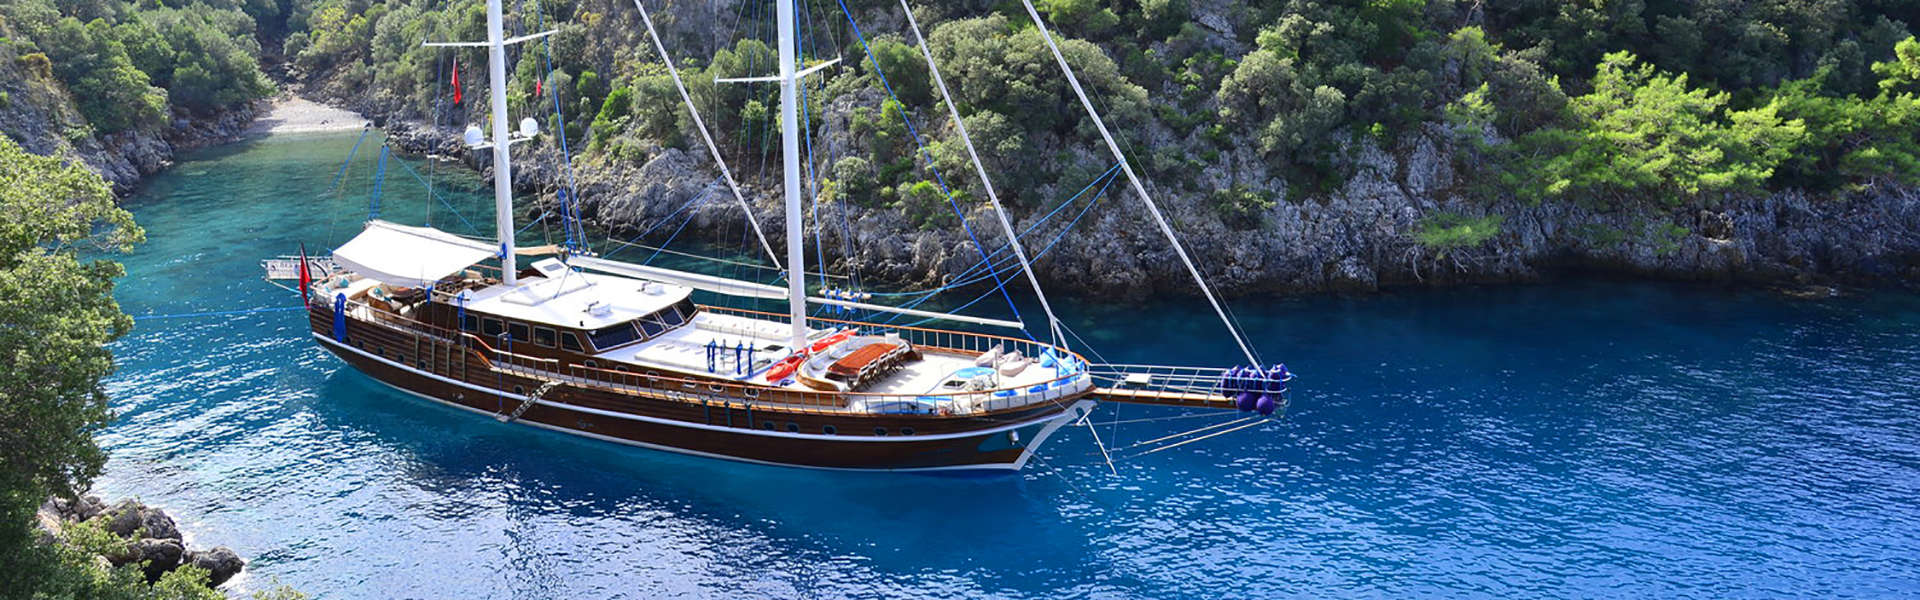 COMPARISON BETWEEN GULET CRUISE IN TURKEY AND GREECE - Header image